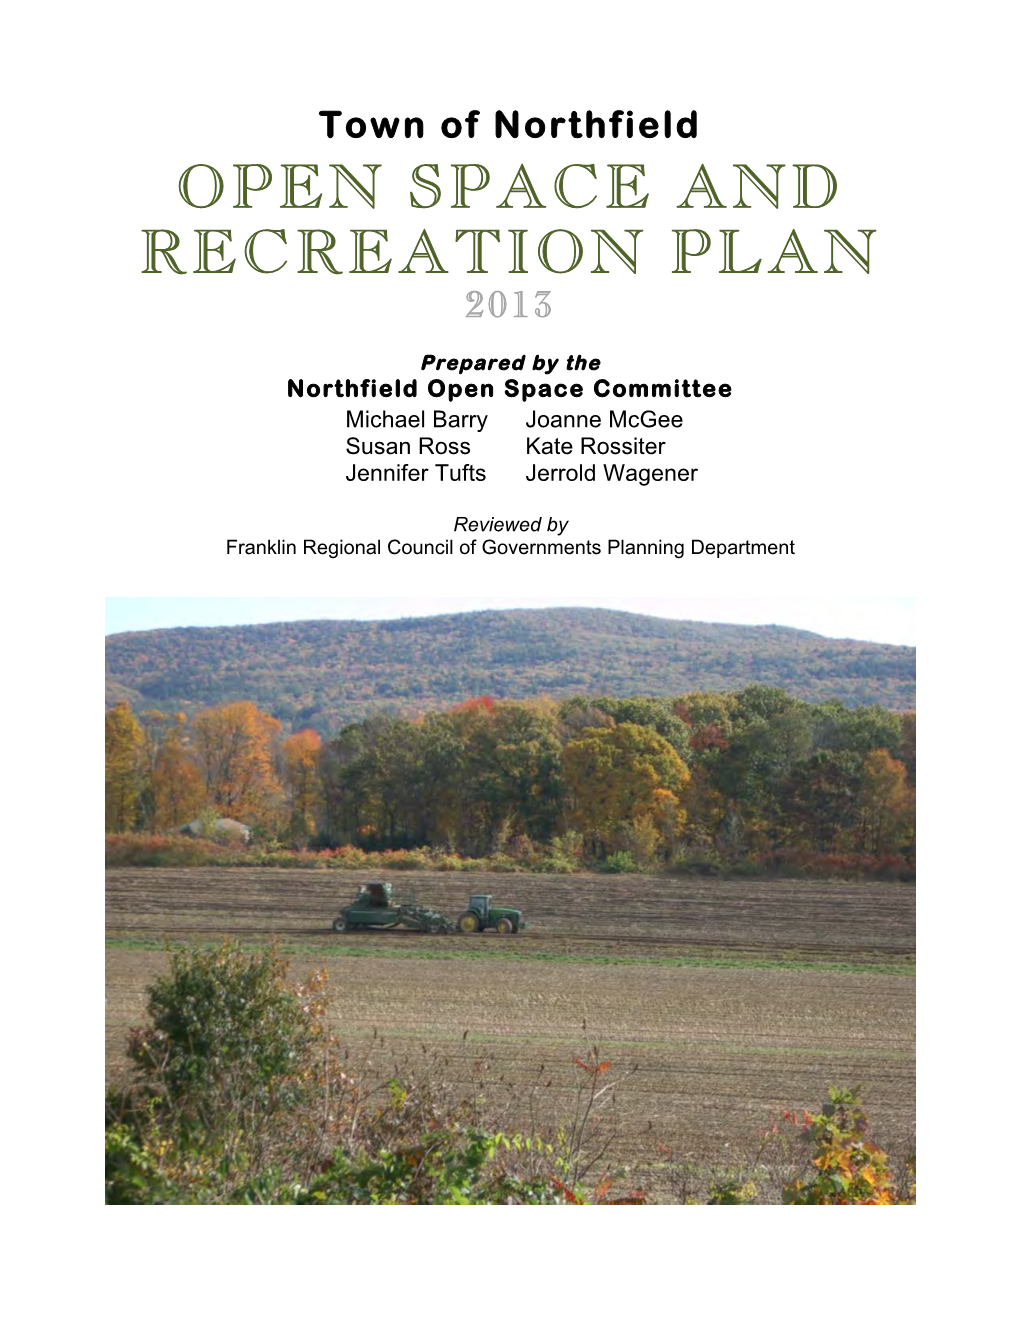 Open Space and Recreation Plan 2013